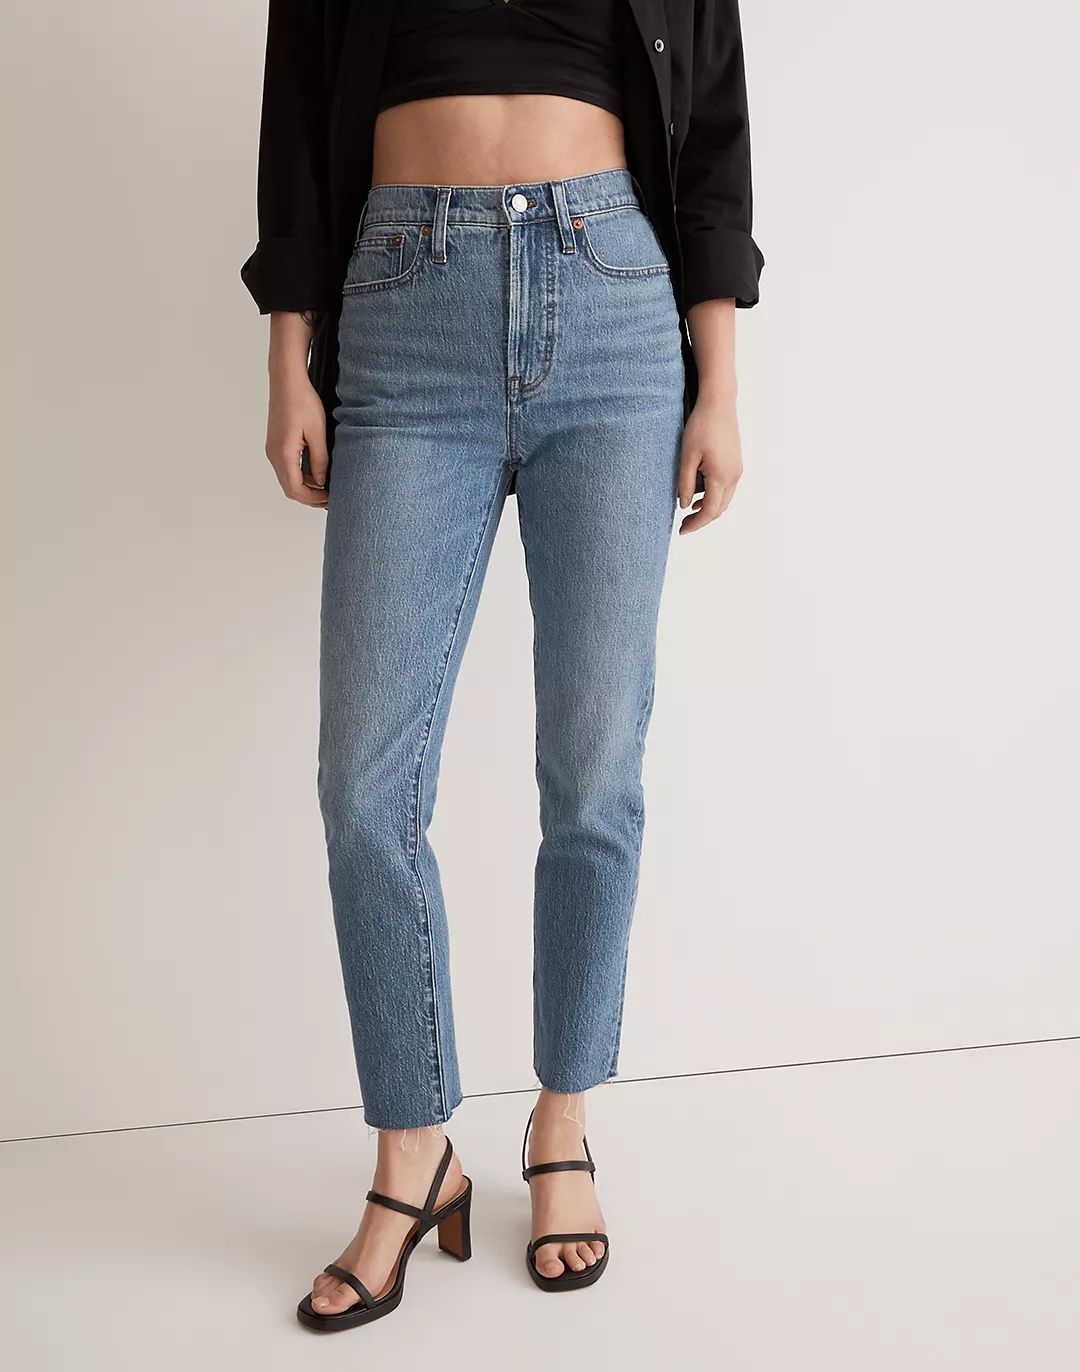 The Petite Perfect Vintage Jean in Earlside Wash: Raw-Hem Edition | Madewell